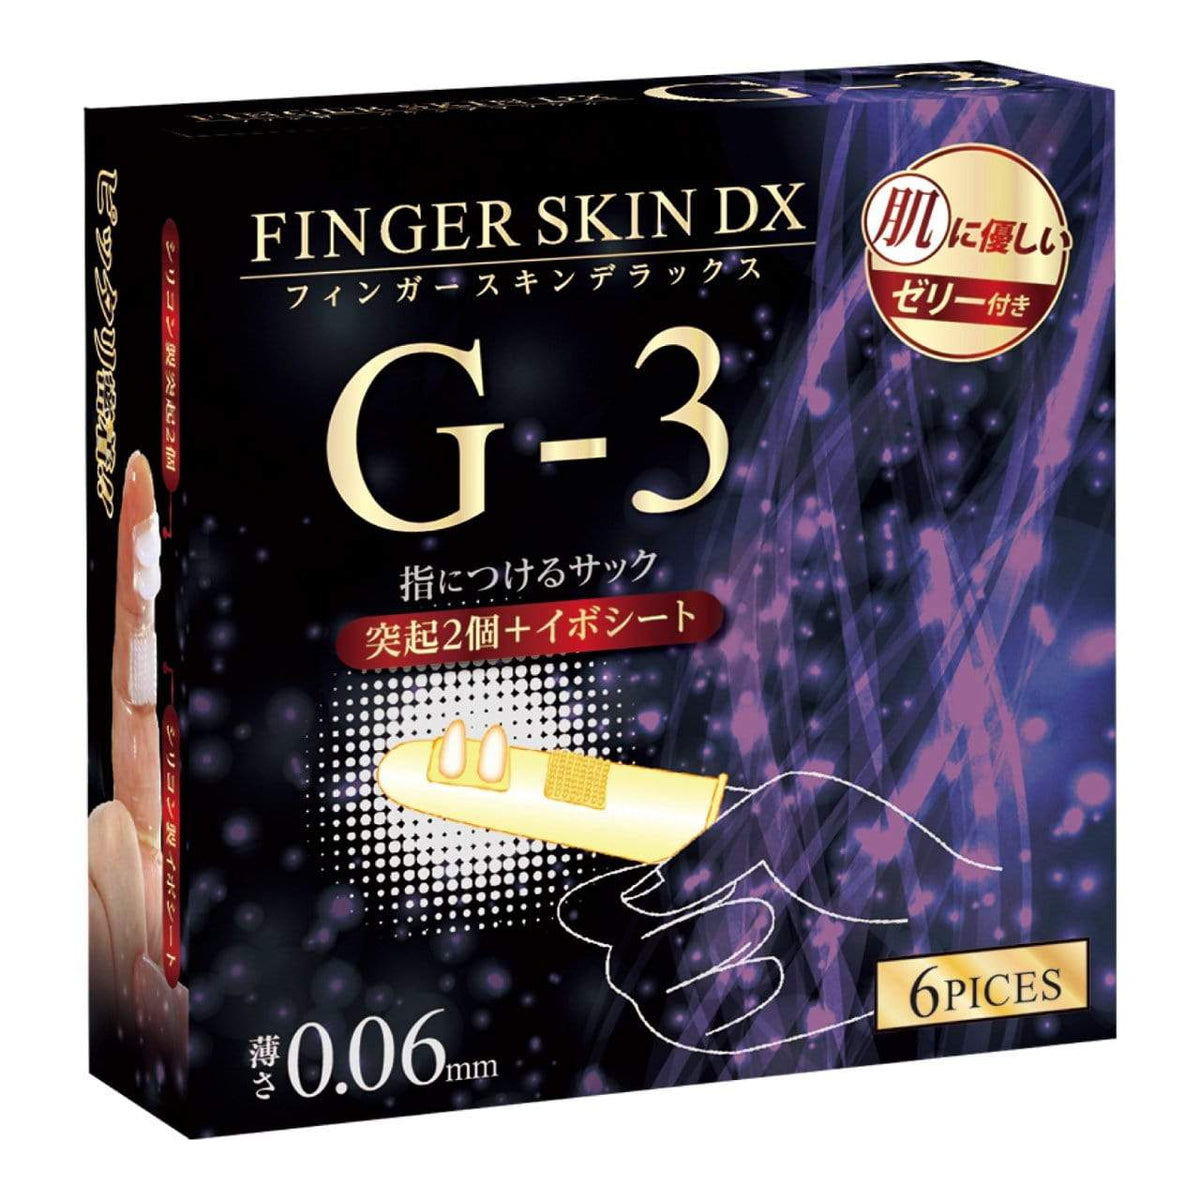 Kiss Me Love - Finger Skin DX Finger Sleeves 6 Pieces  Clear 4560444118168 Clit Massager (Non Vibration)